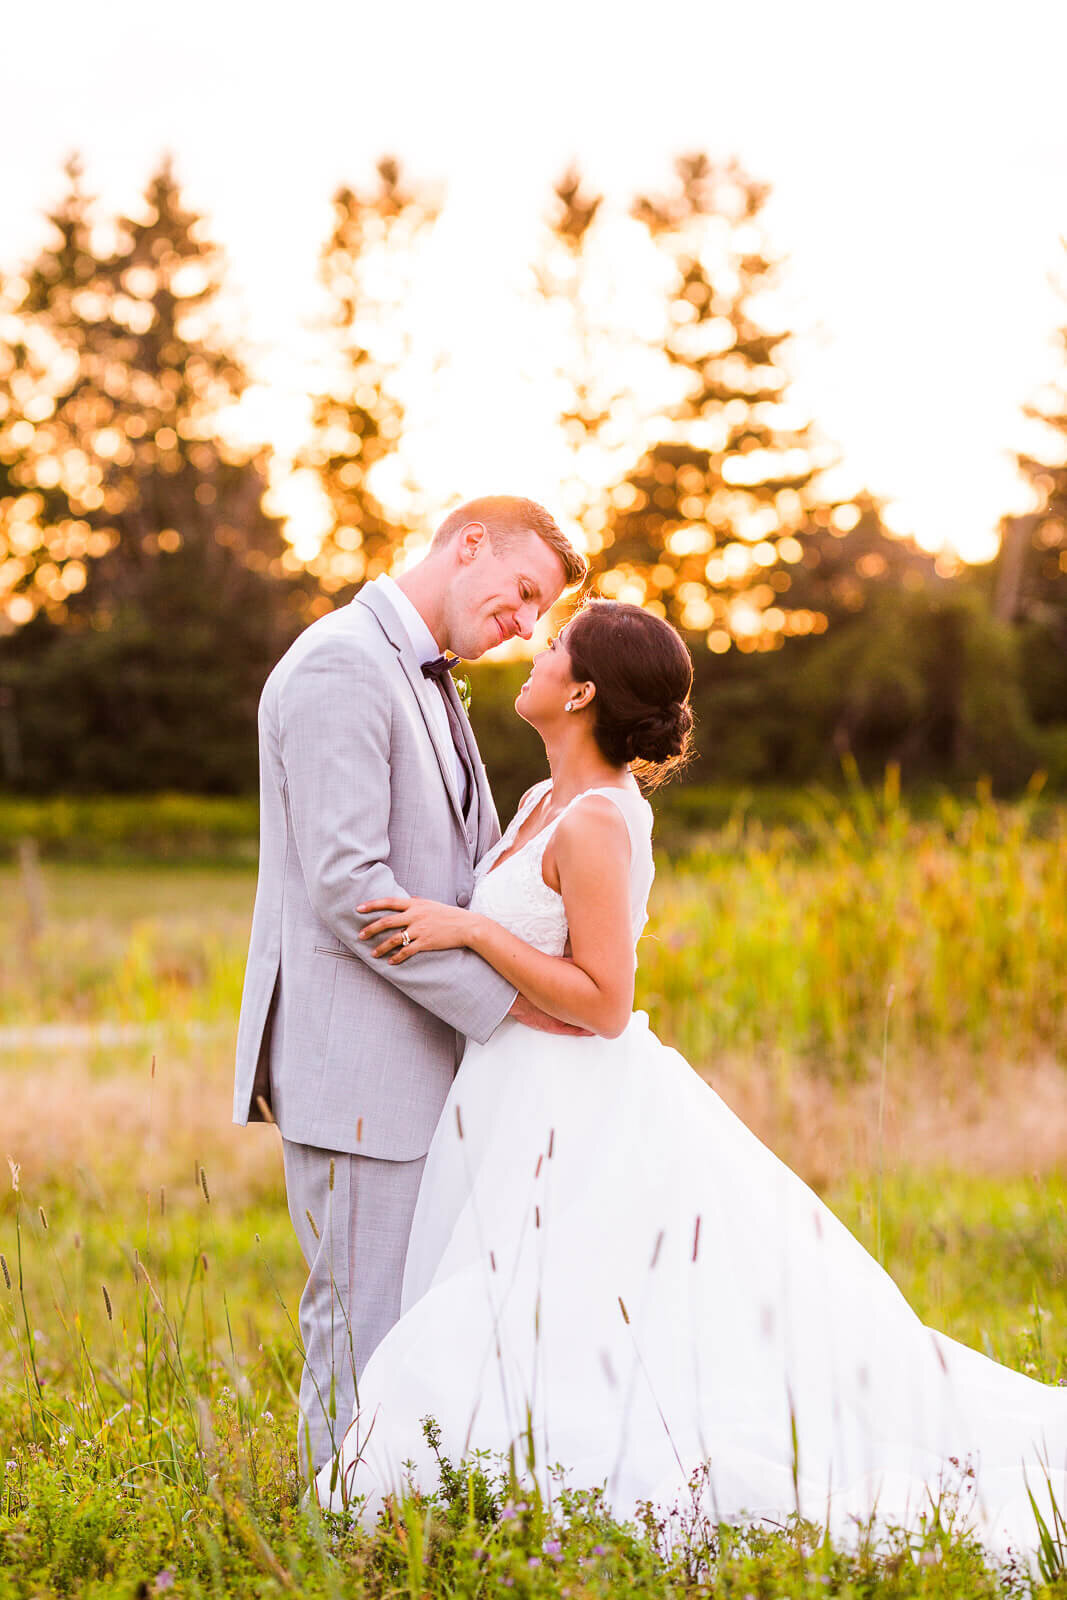 Bride and groom embrace at sunset in field at The Clearing near London Ontario.